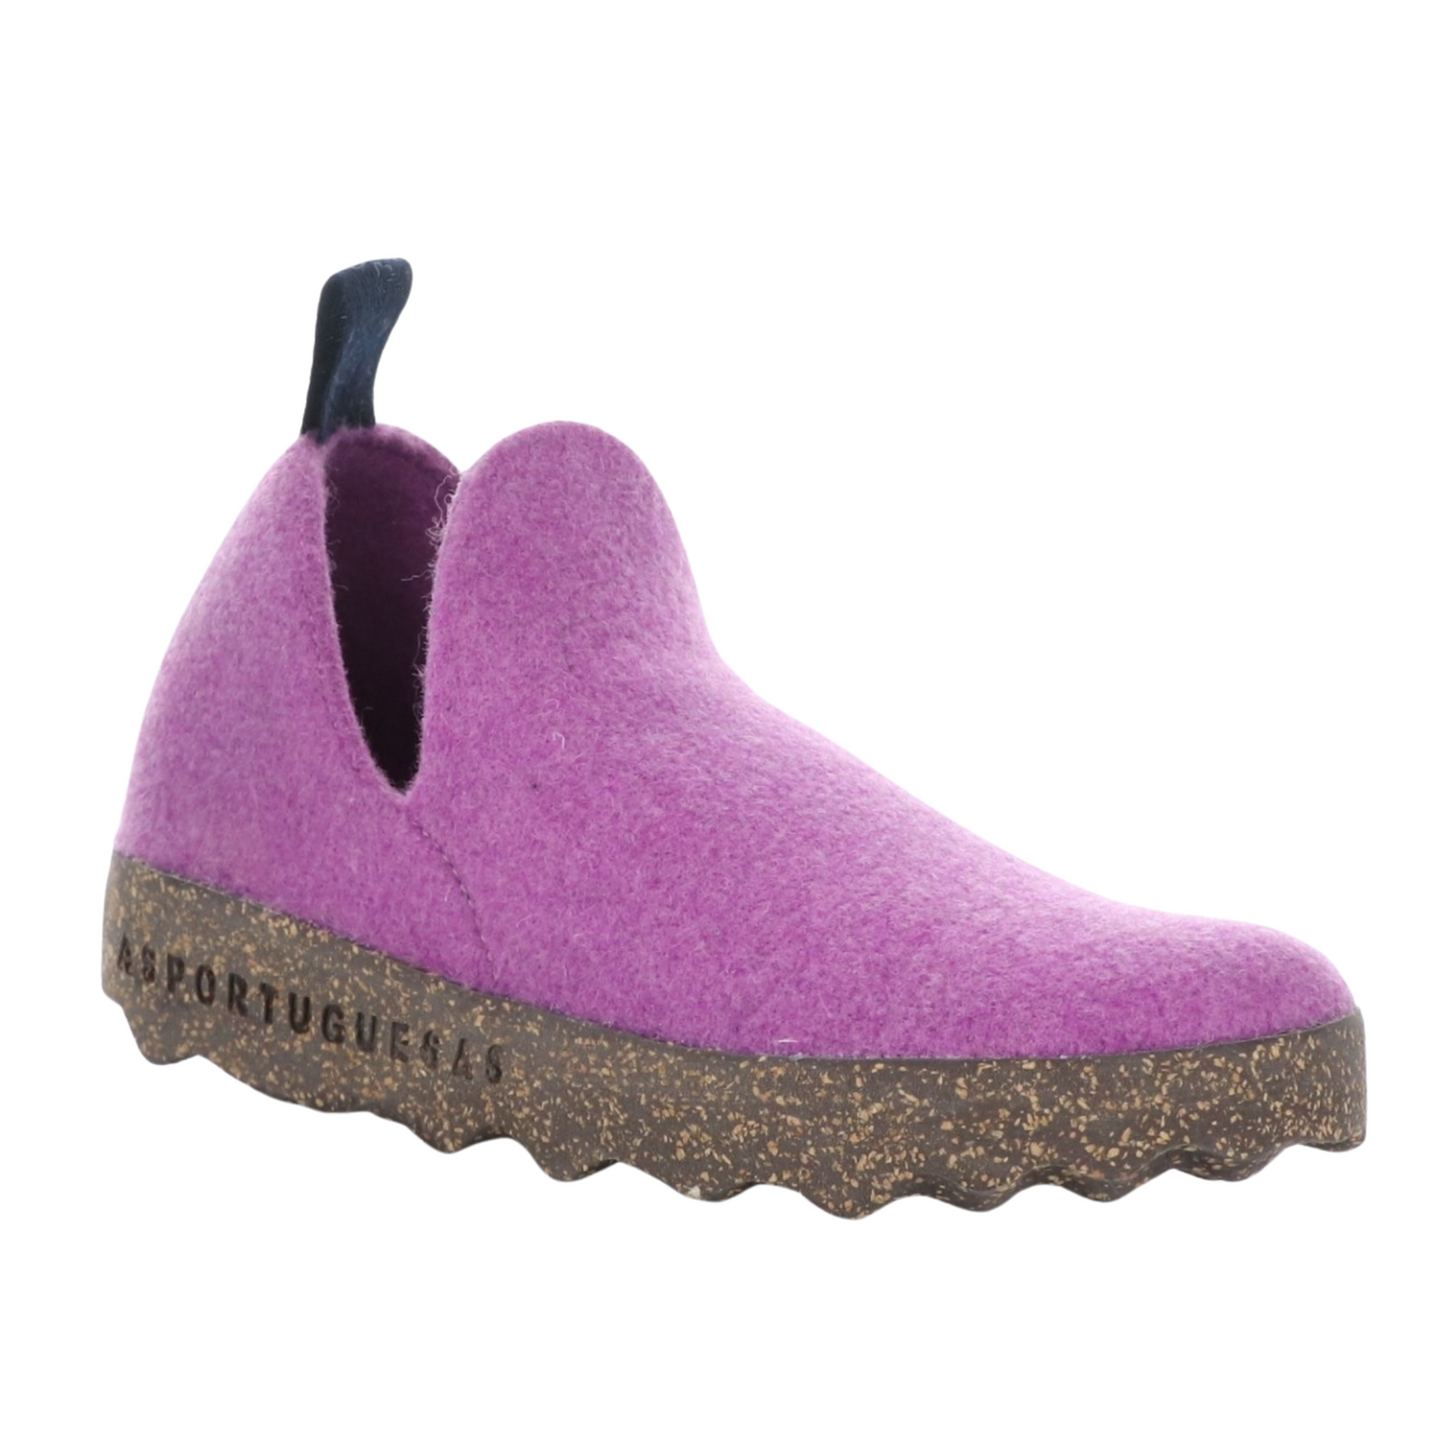 A pink wool sneaker with oblong cutouts, navy heel tab, and toffee cork soul is pictured in at a slight angle from the front.